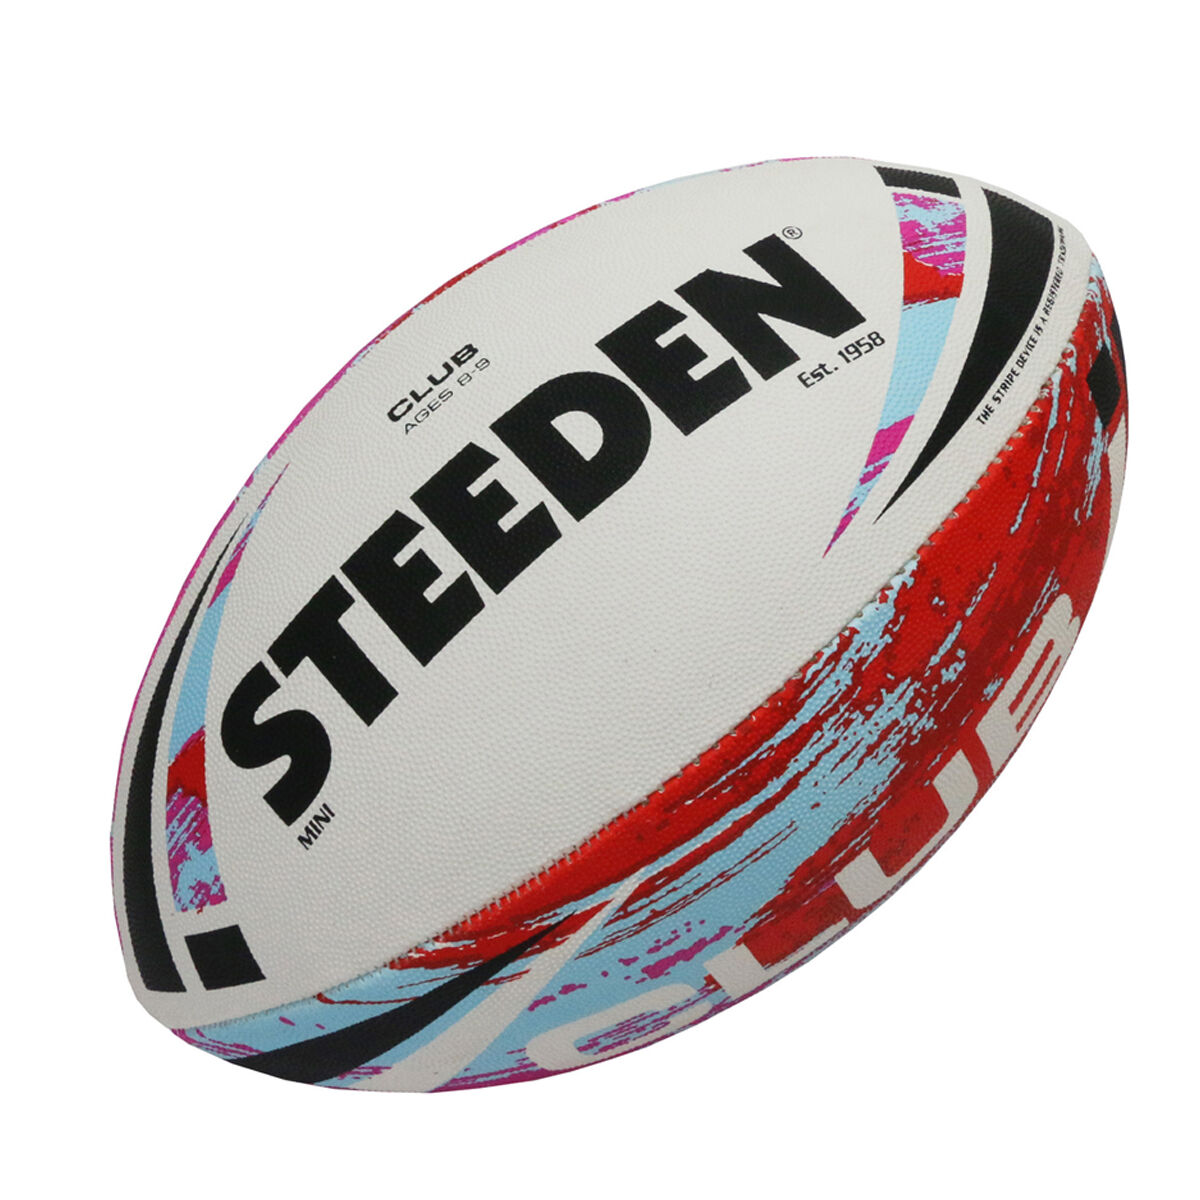 MOD Steeden NRL Official QLD Trainer Ball in White/Yellow Size 4